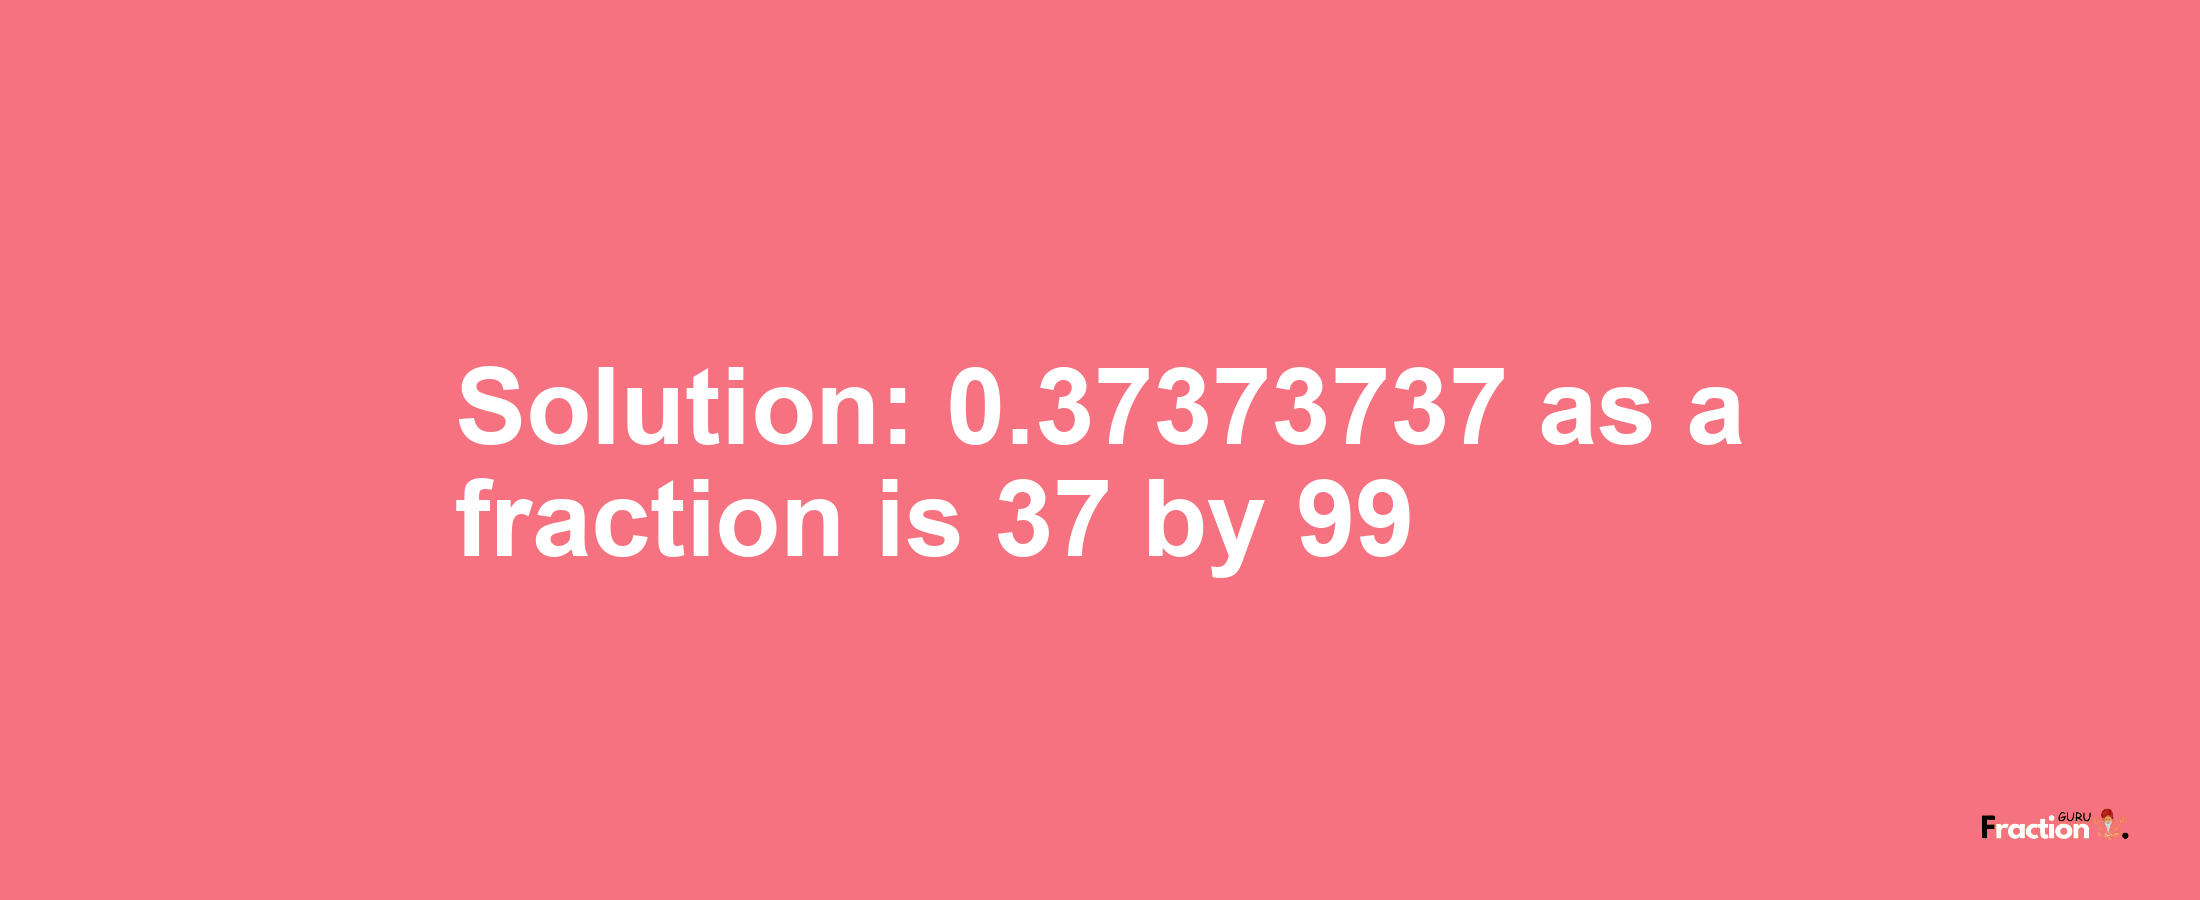 Solution:0.37373737 as a fraction is 37/99